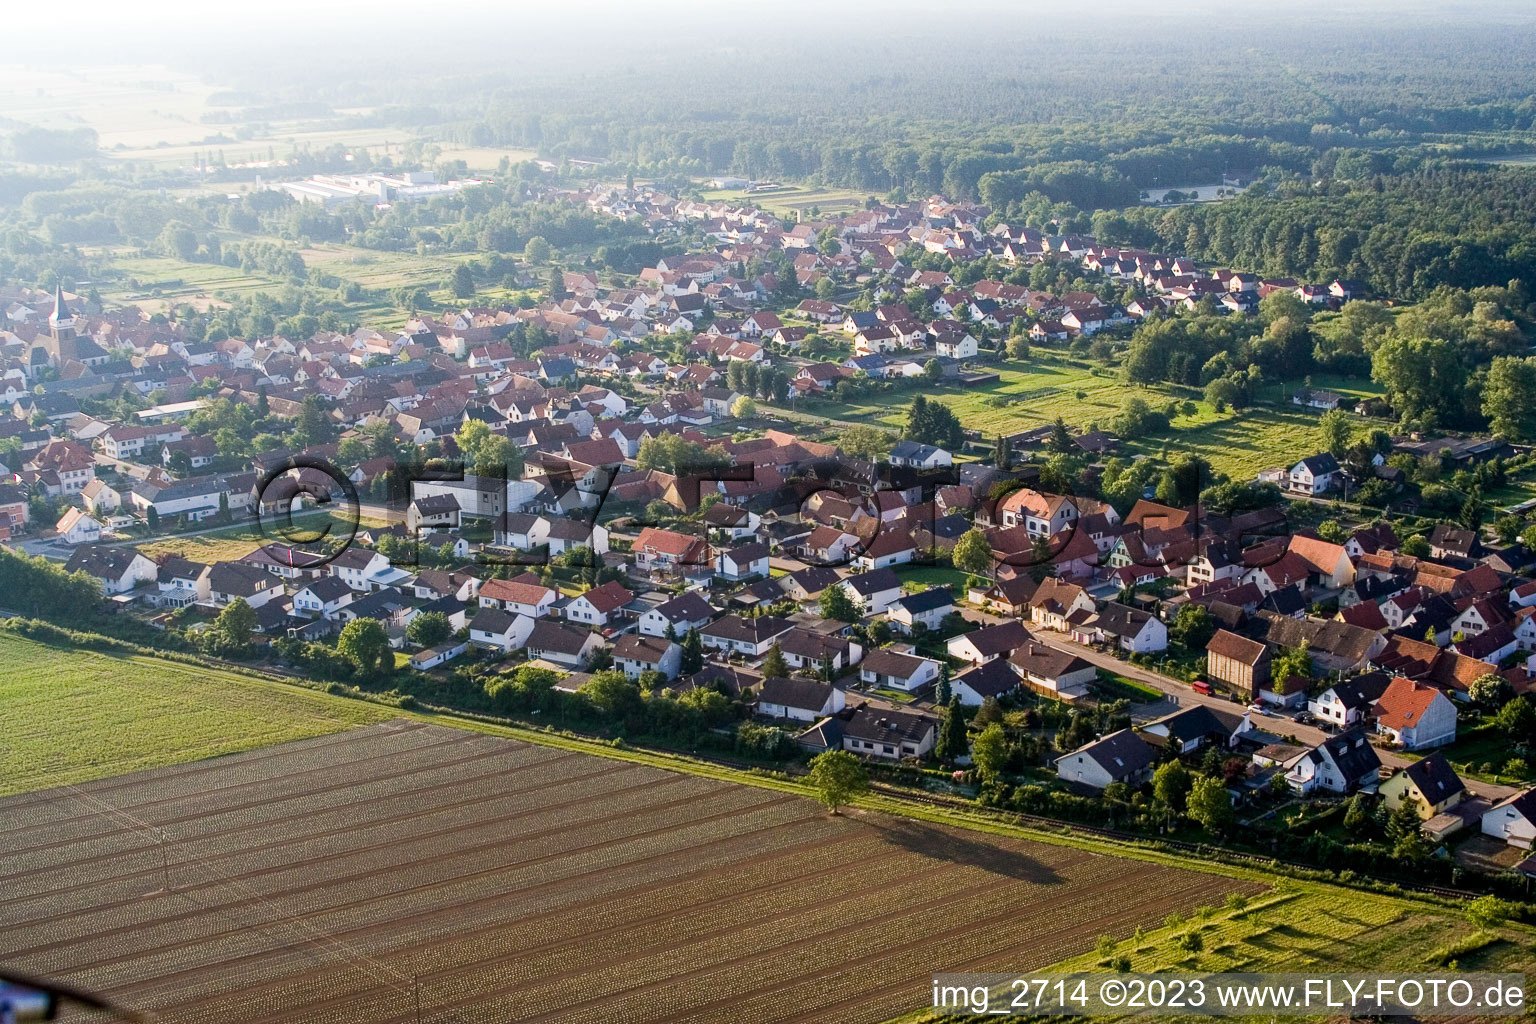 Aerial photograpy of From northwest in the district Schaidt in Wörth am Rhein in the state Rhineland-Palatinate, Germany